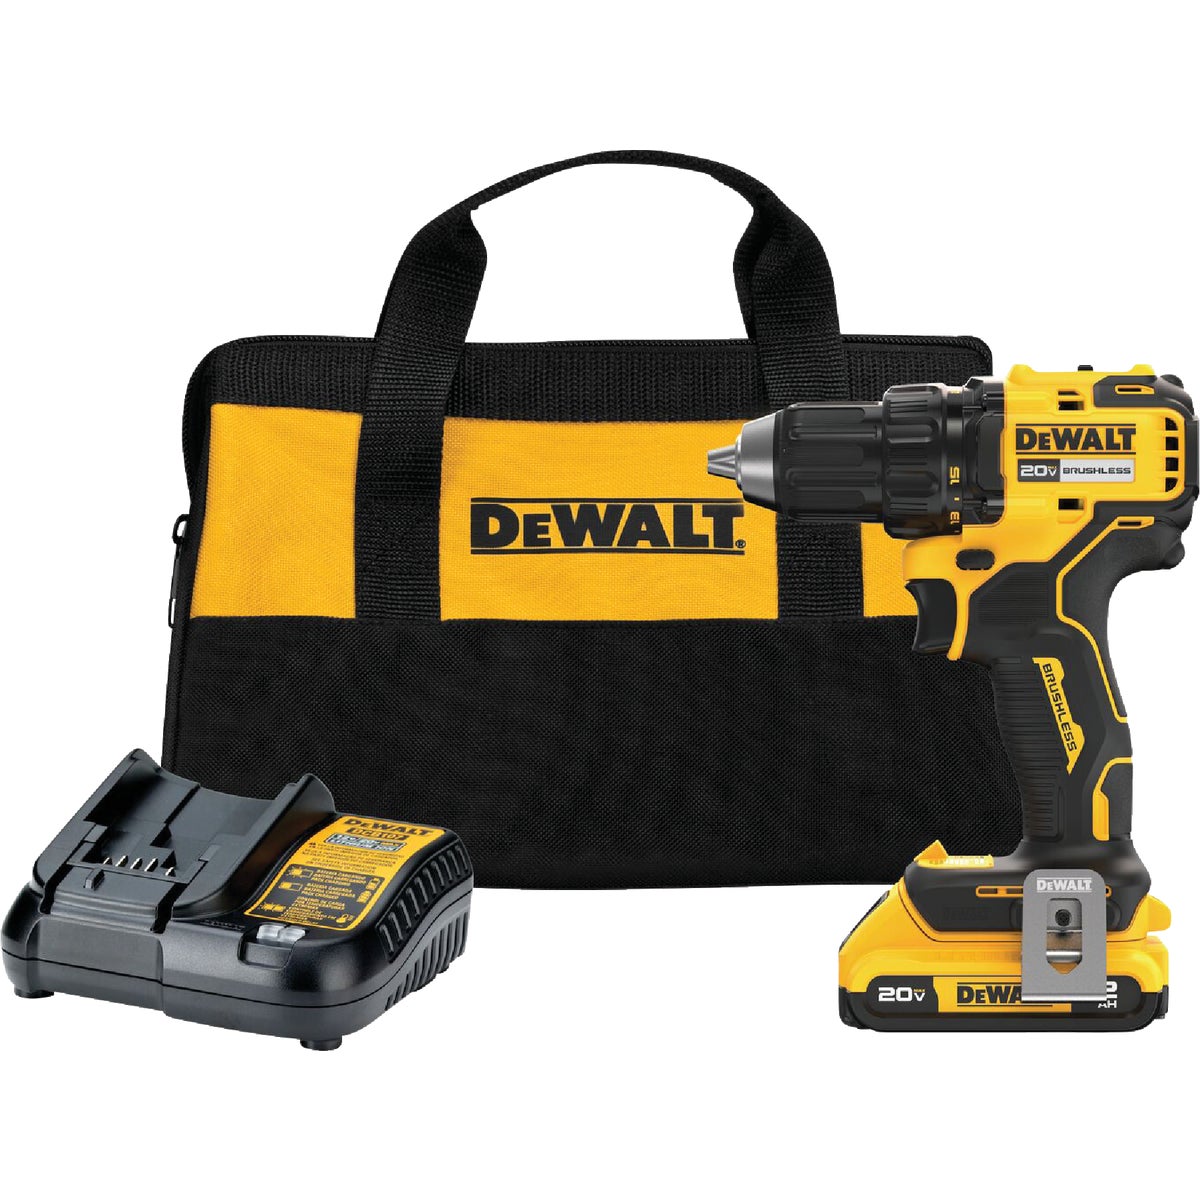 DEWALT 20-Volt MAX Lithium-Ion Brushless 1/2 In. Compact Cordless Drill Kit